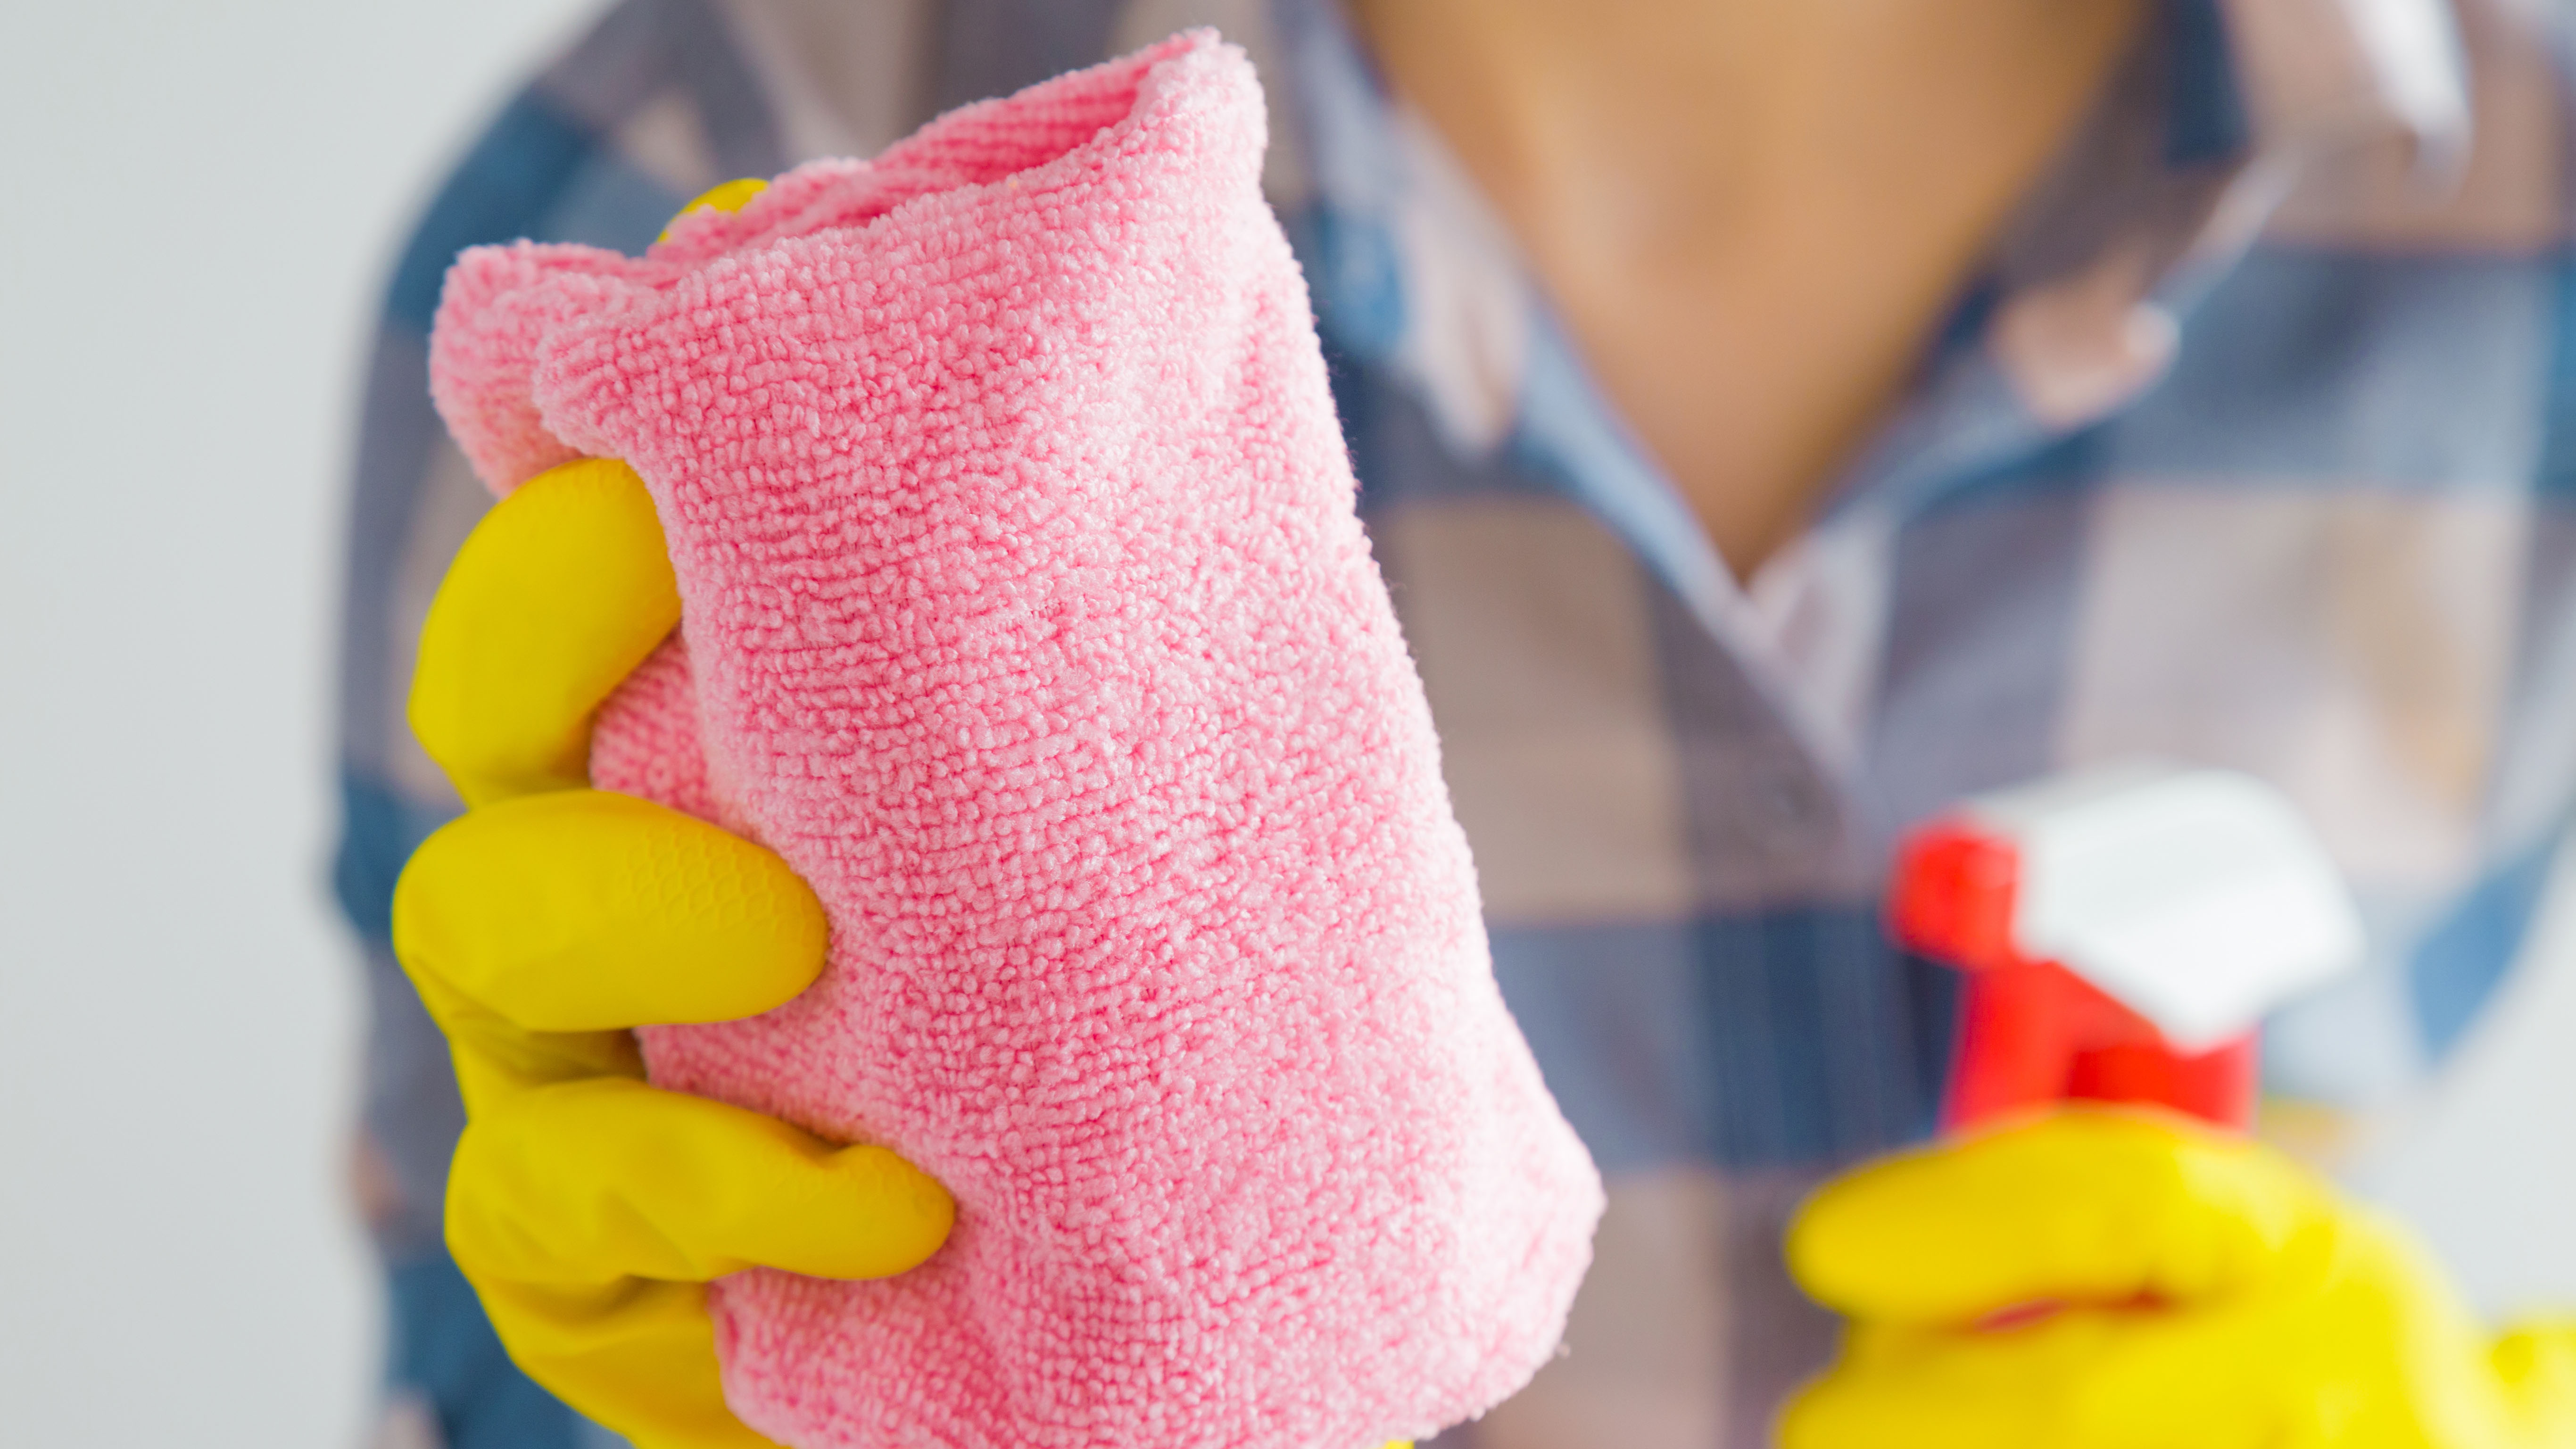 A pink microfiber cloth with a cleaning spray aimed at it held by gloved hands